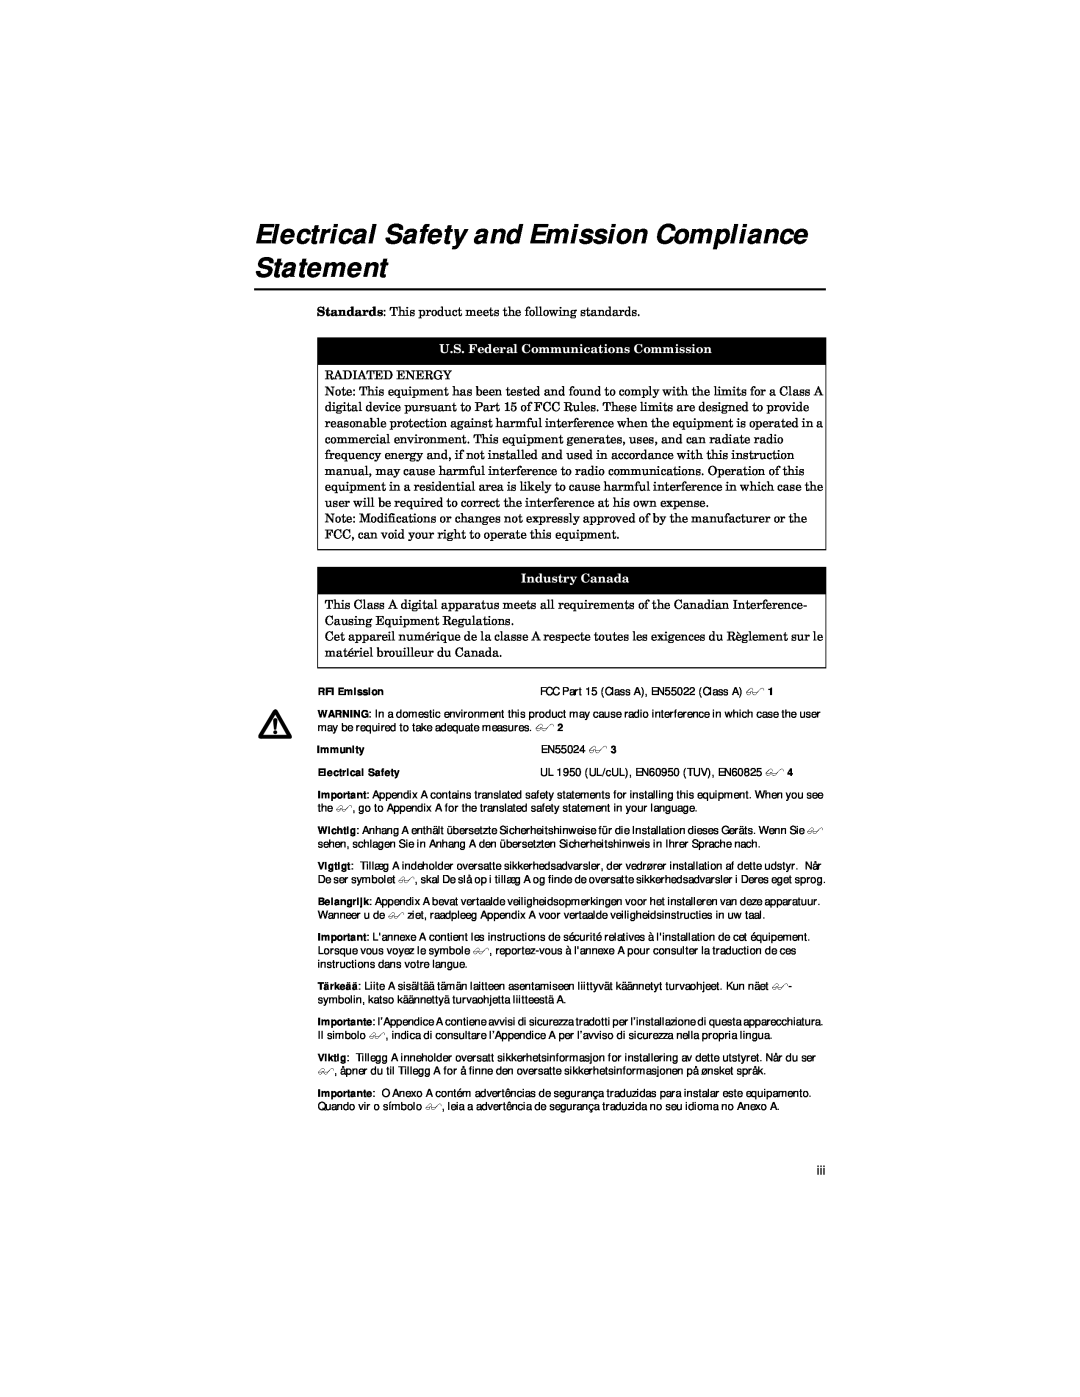 Allied Telesis ATFS705EFCSC60 Electrical Safety and Emission Compliance Statement, U.S. Federal Communications Commission 